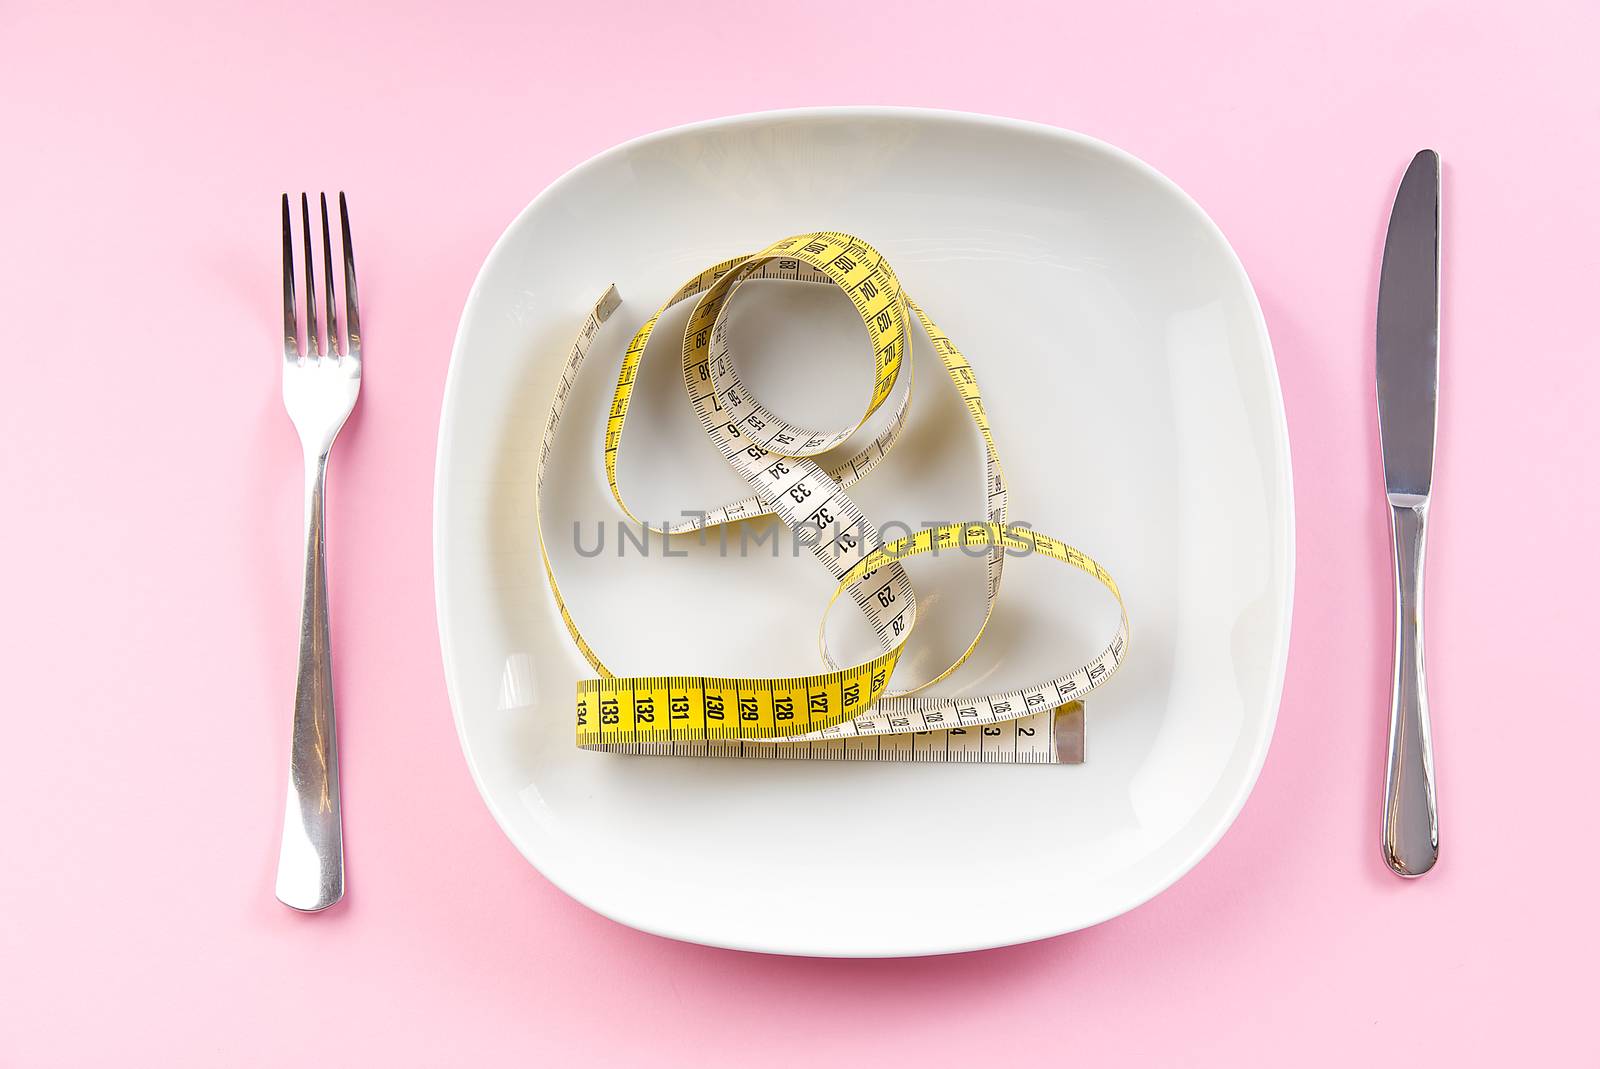 Weight Loss Measuring Tape on white plate, concept of healthy dieting. pink Background